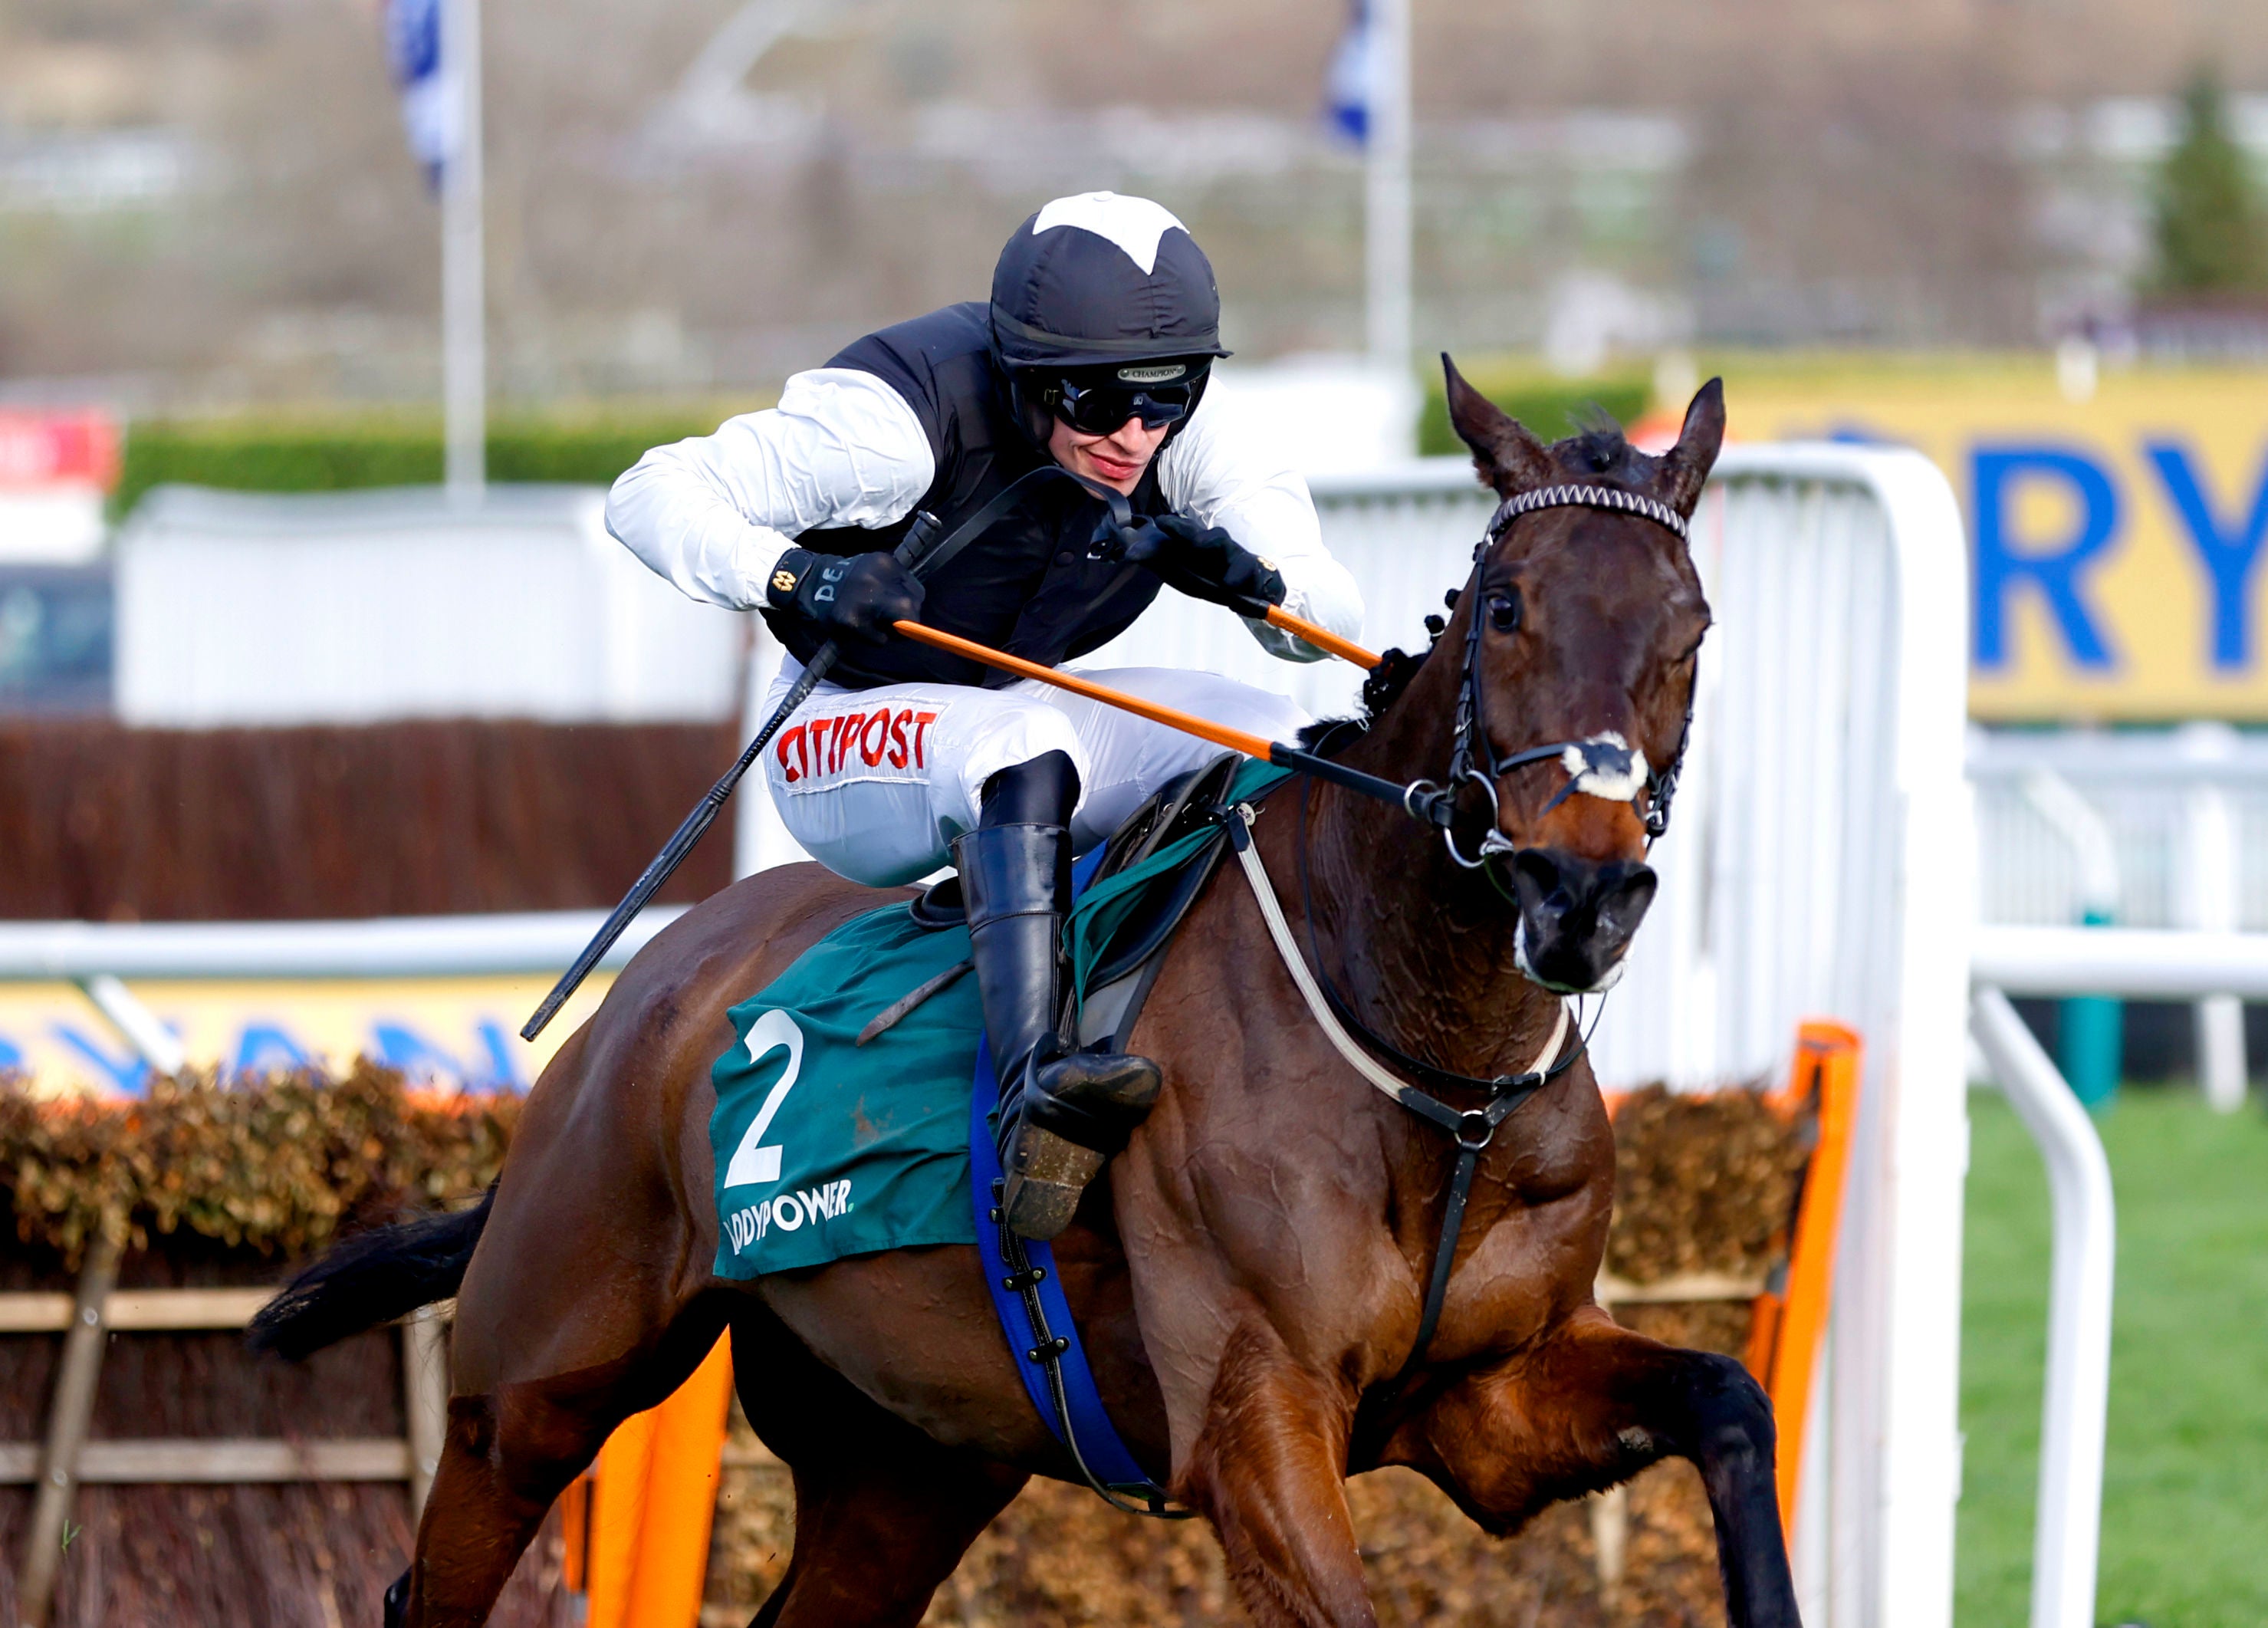 Flooring Porter and Danny Mullins won the Stayers’ Hurdle